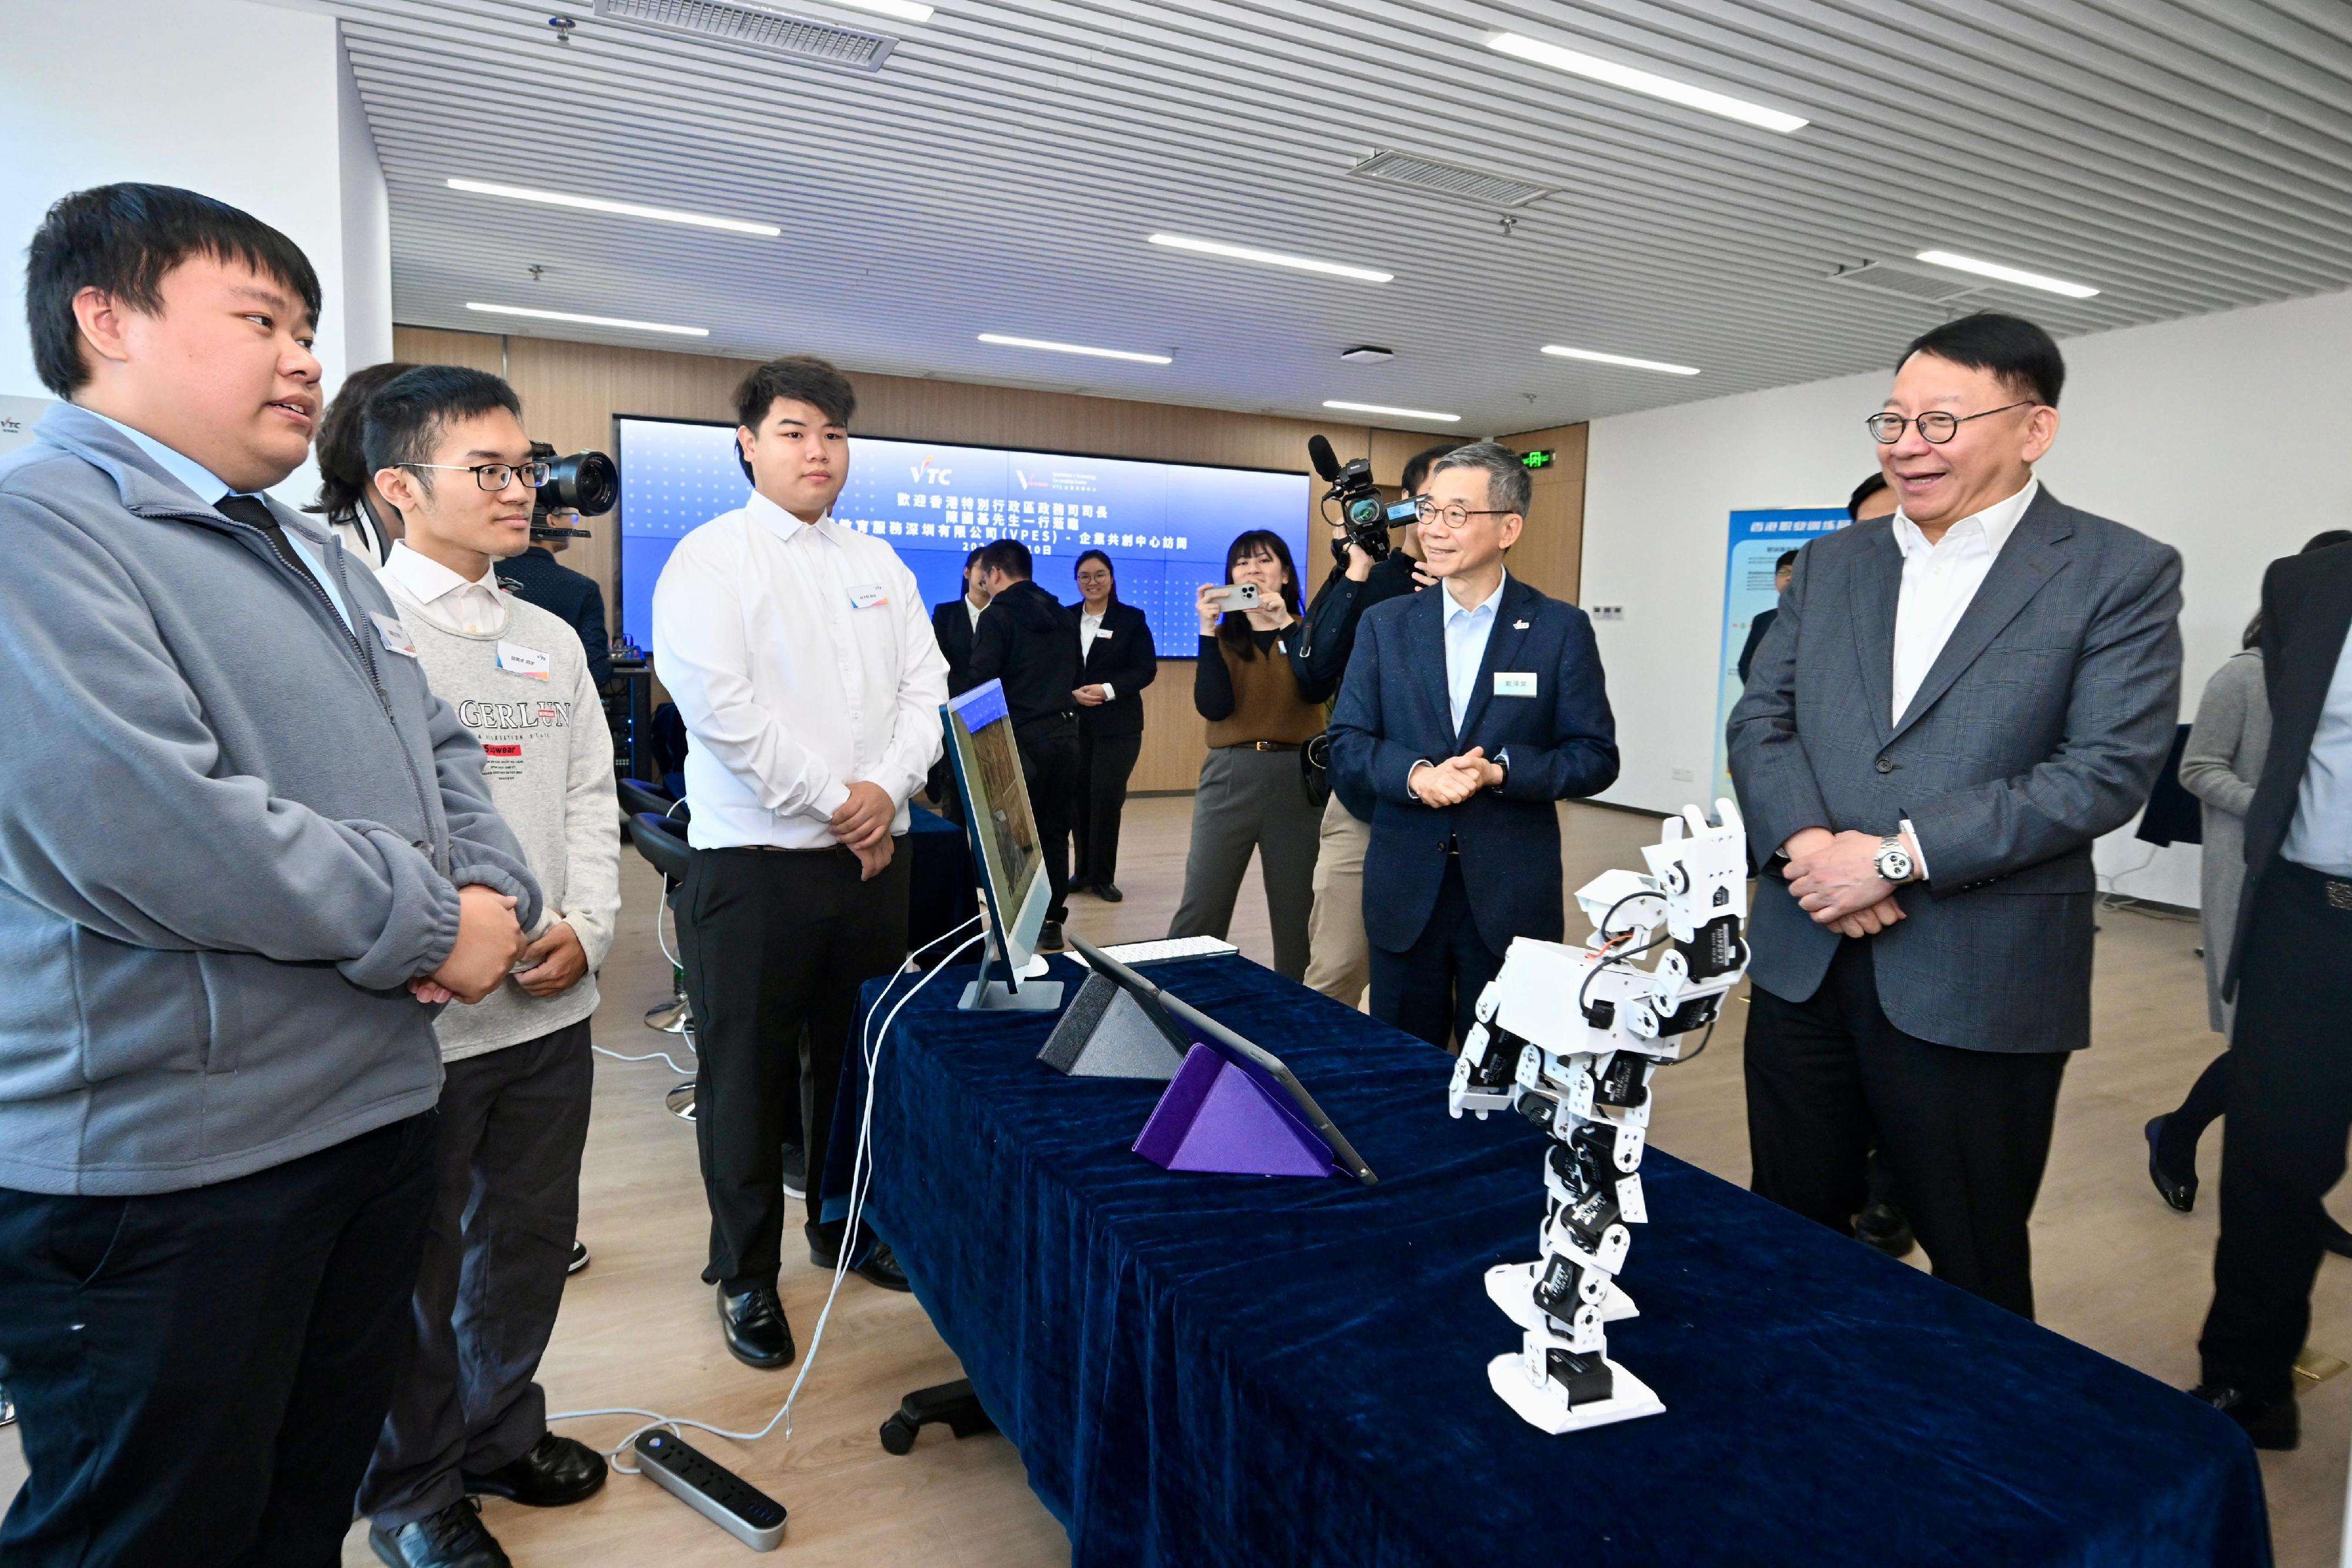 The Chief Secretary for Administration, Mr Chan Kwok-ki, today (January 10) visited Shenzhen and concluded his visit to Mainland cities of the Guangdong-Hong Kong-Macao Greater Bay Area. Photo shows Mr Chan (first right) exploring the Innovation and Technology Co-creation Centre of the Vocational and Professional Education Services (Shenzhen) Company Limited. Next to him is the Chairman of the Hong Kong Vocational Training Council, Mr Tony Tai (second right).